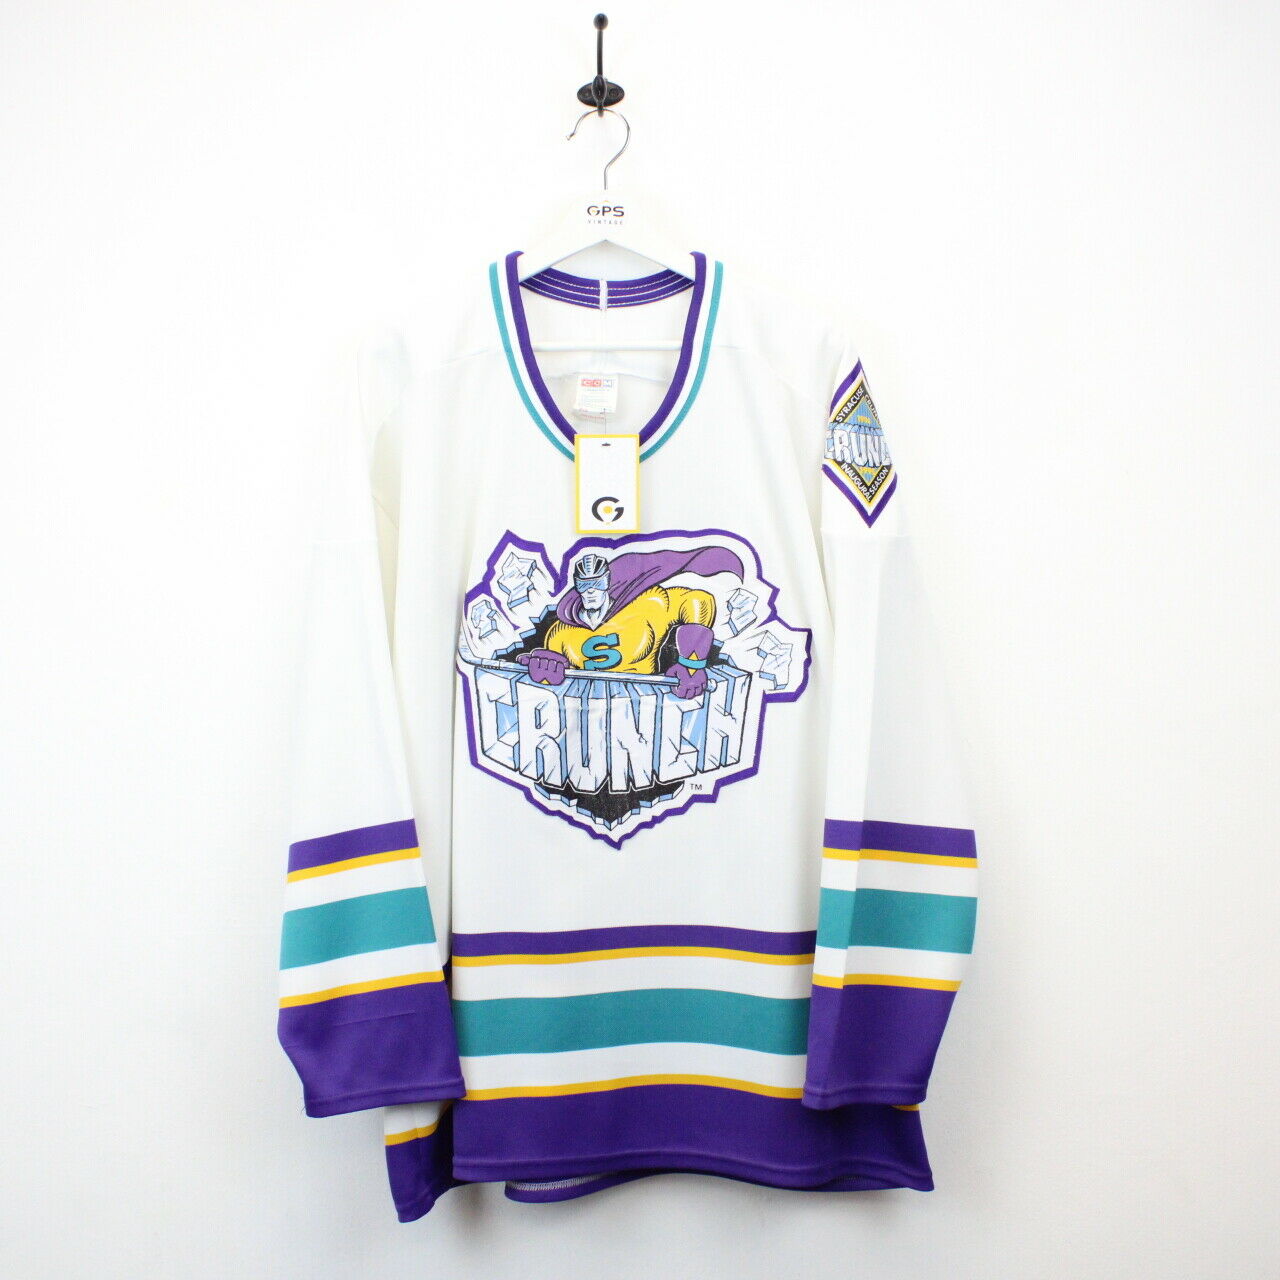 These Syracuse Crunch jerseys are super 90's and so are these 6